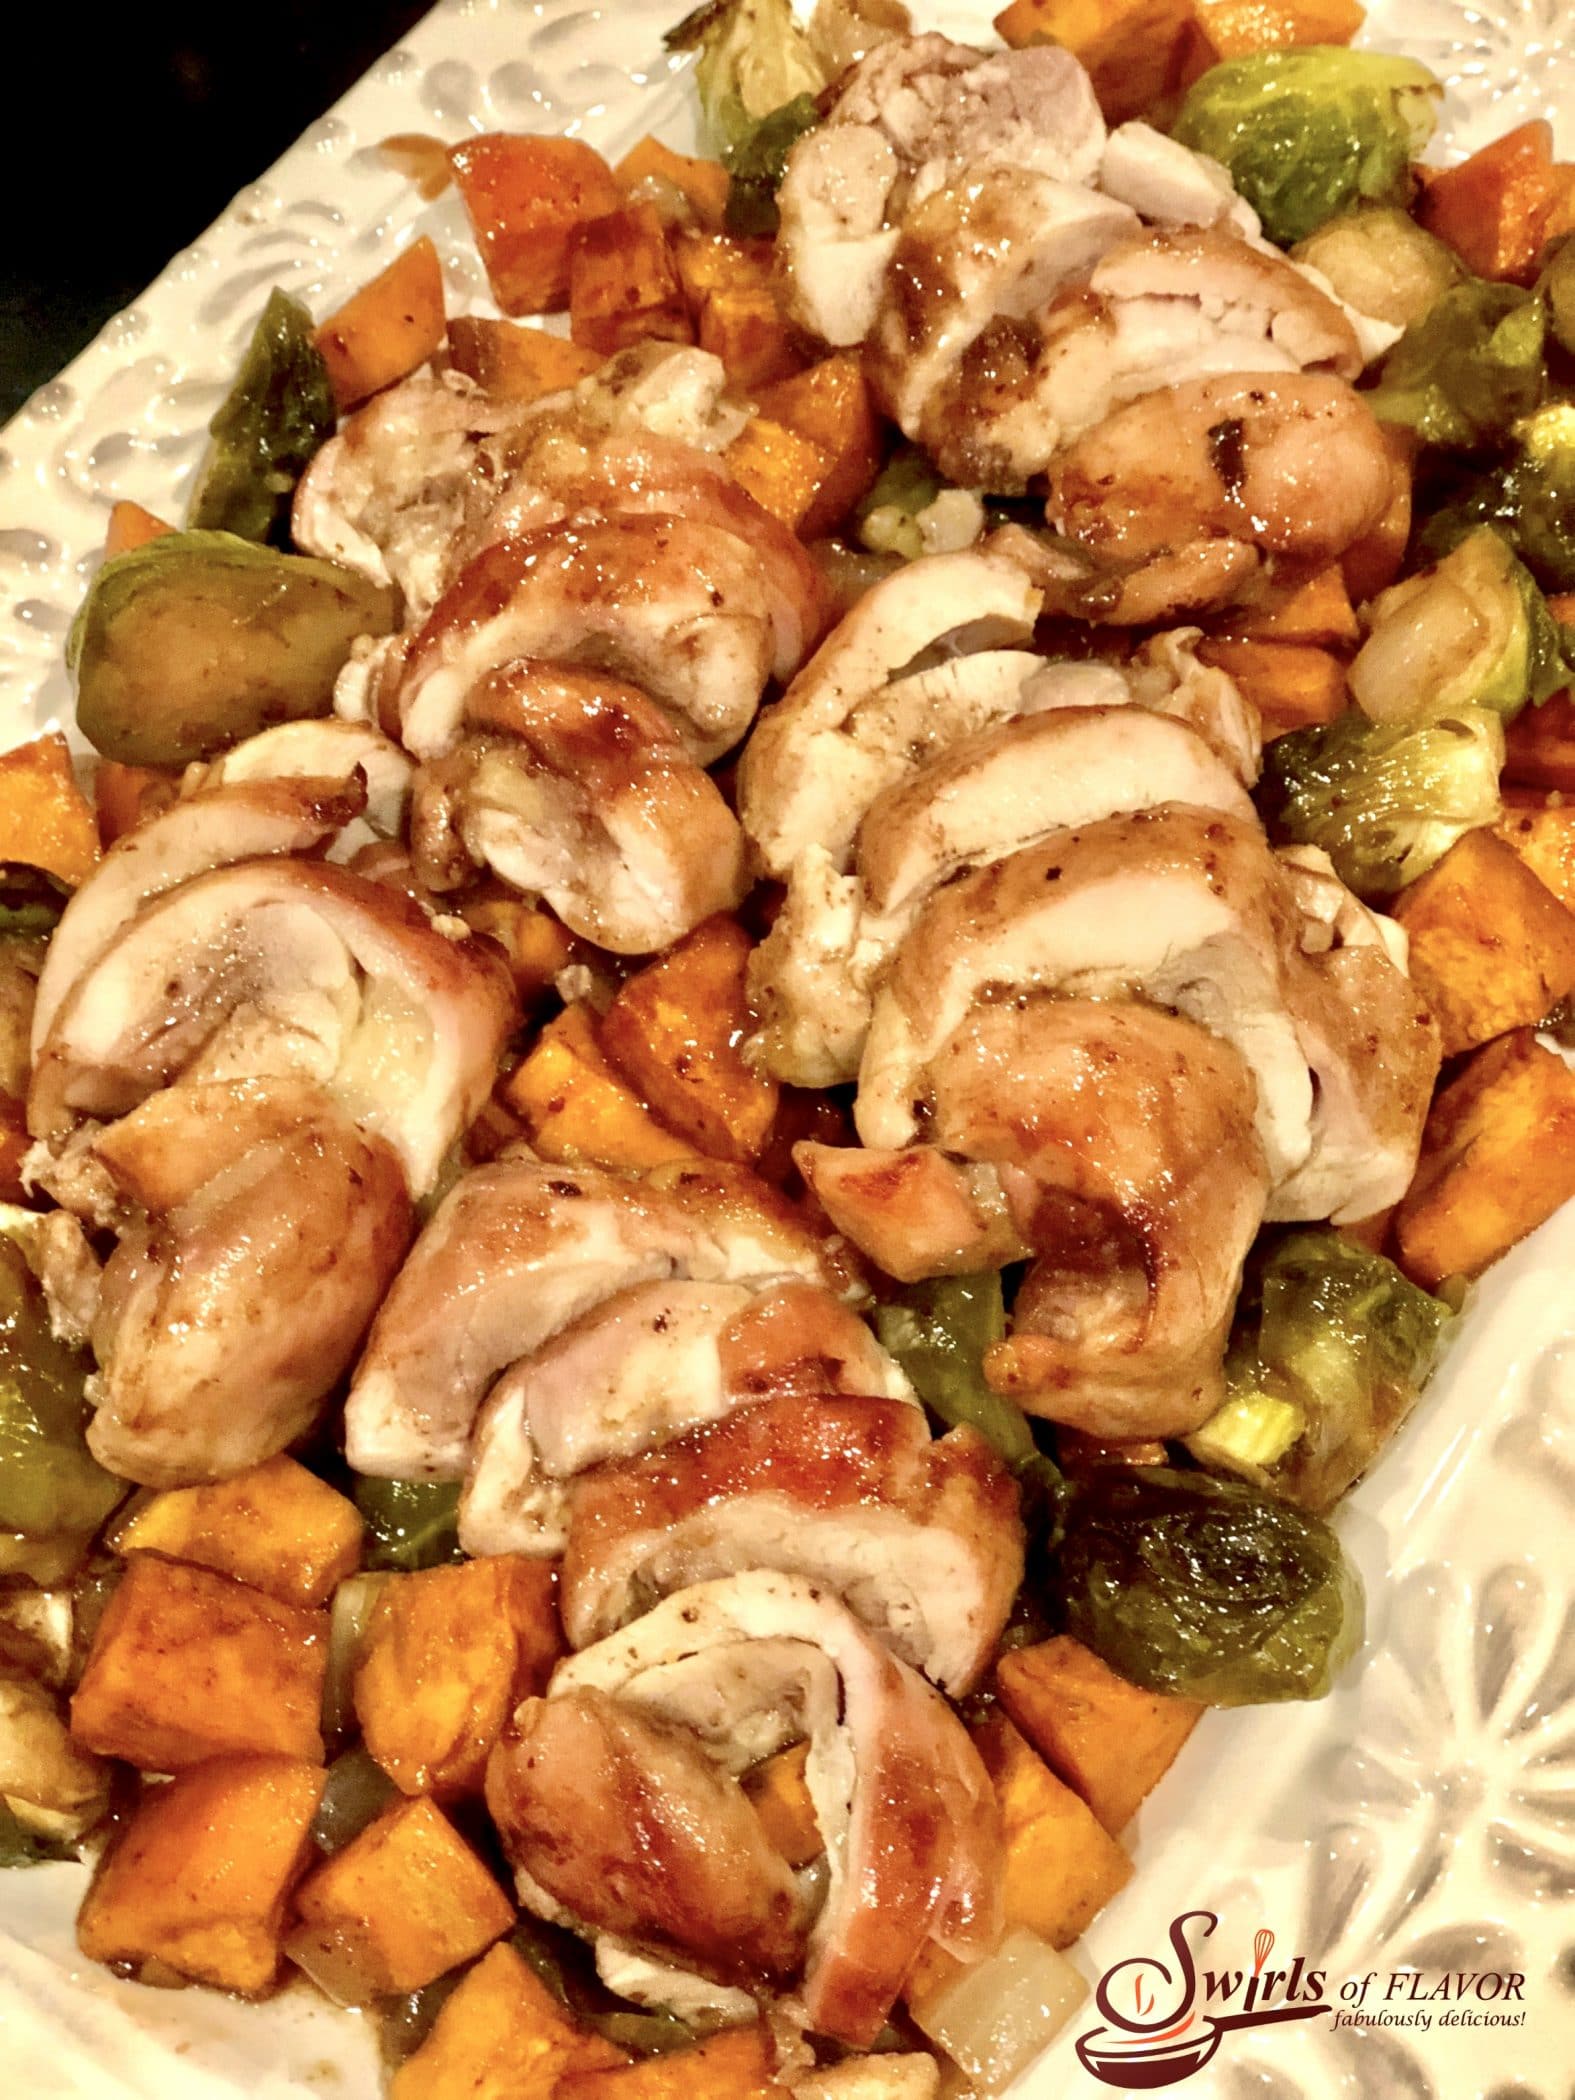 chicken with sweet potatoes and Brussels sprouts served on a platter